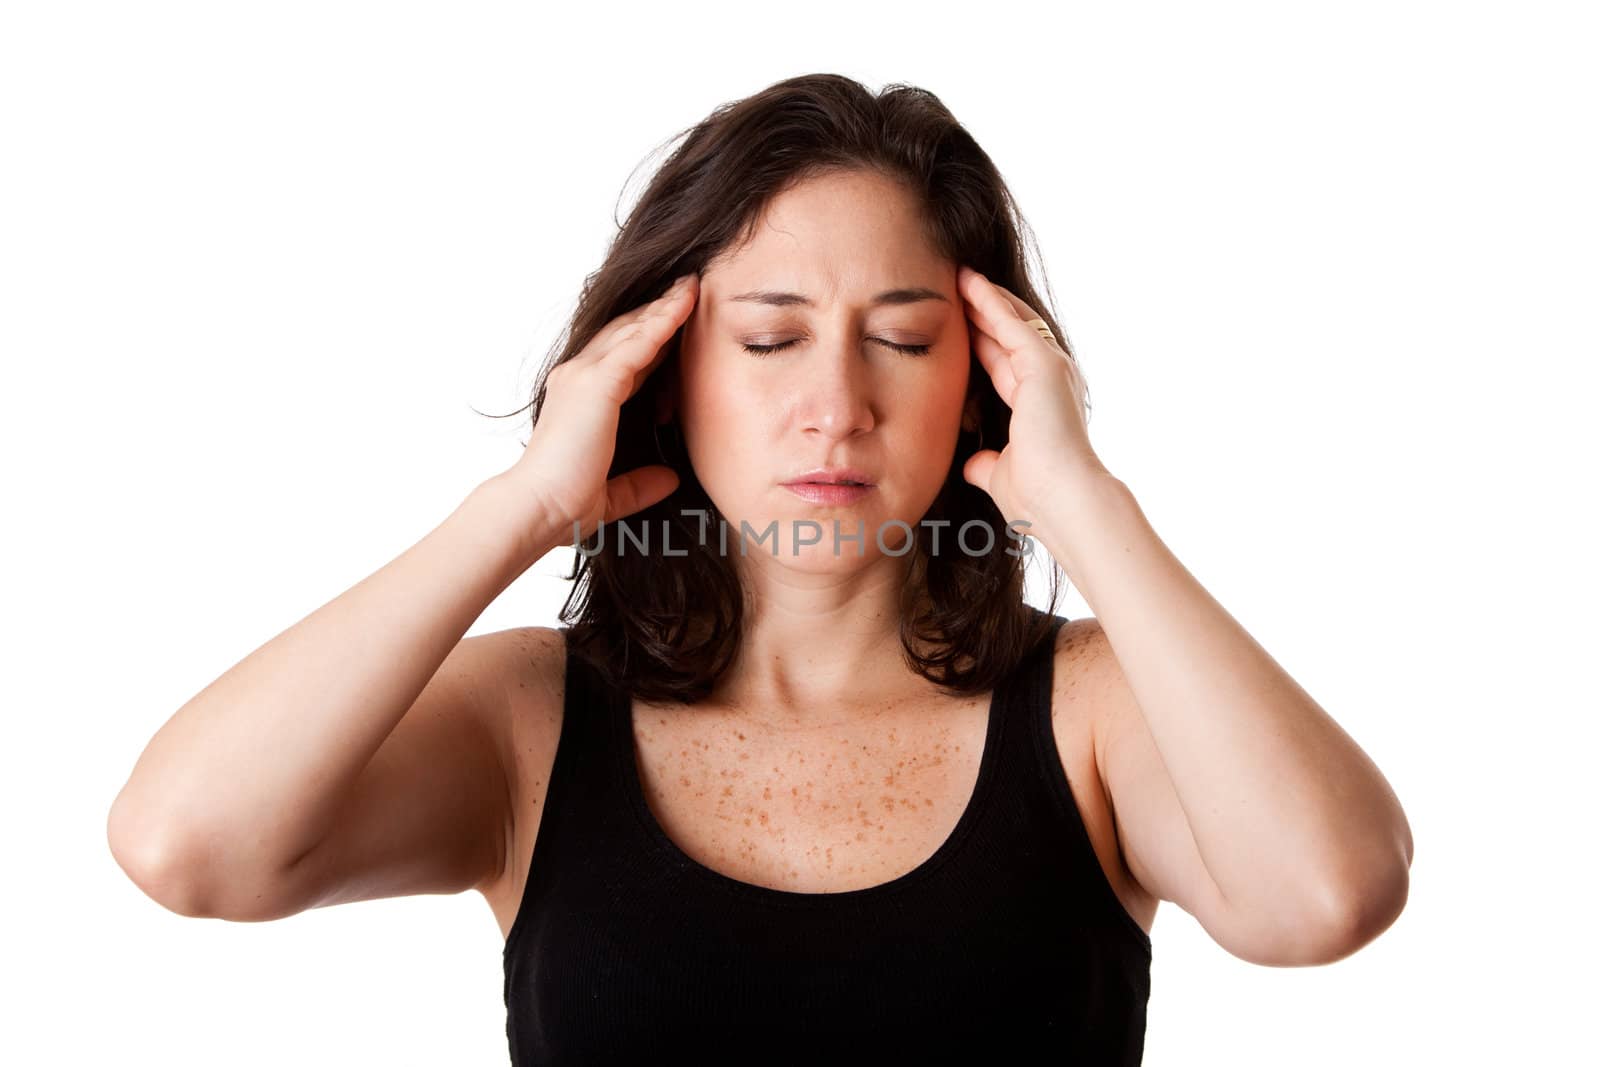 Face of beautiful young attractive woman with headcahe migraine unwell expression feeling sick, holding her head, isolated.